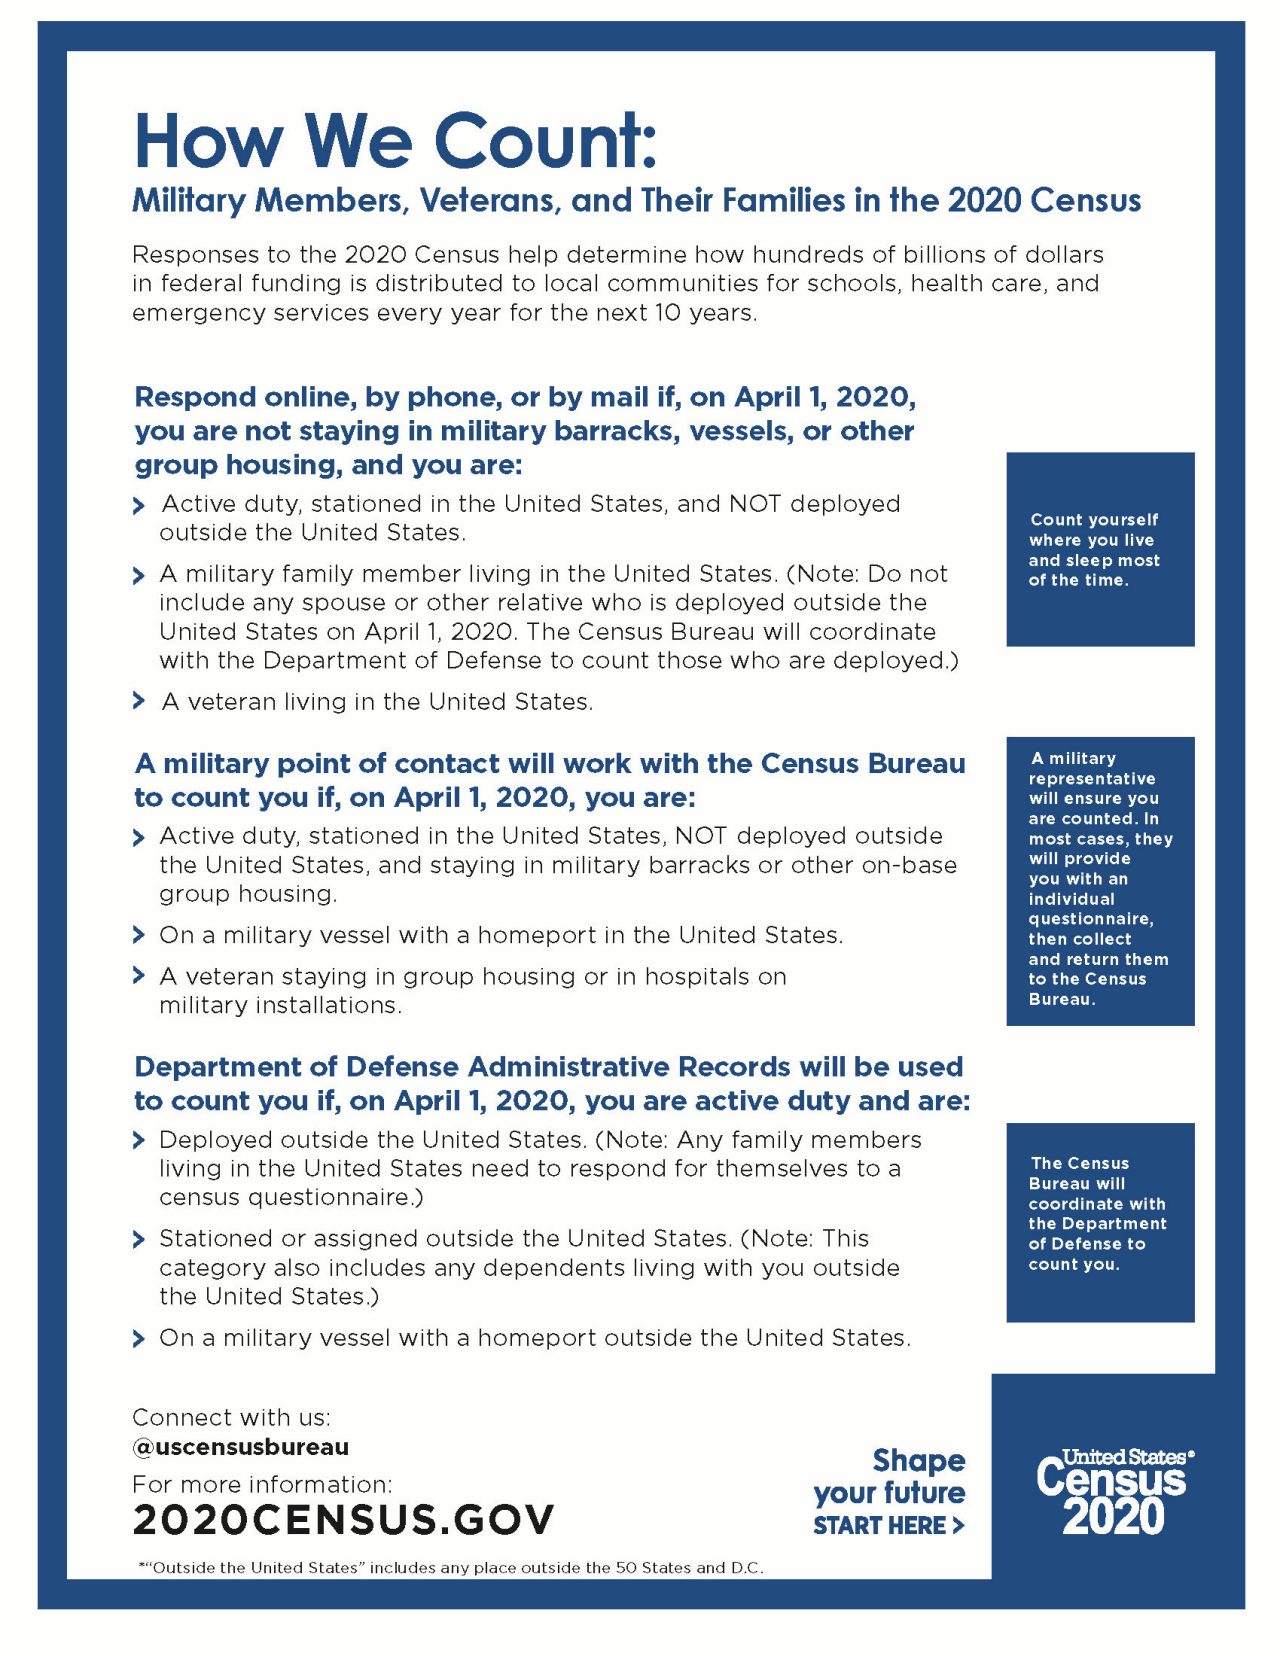 How We Count: Military Members, Veterans, and Their Families in the 2020 Census 